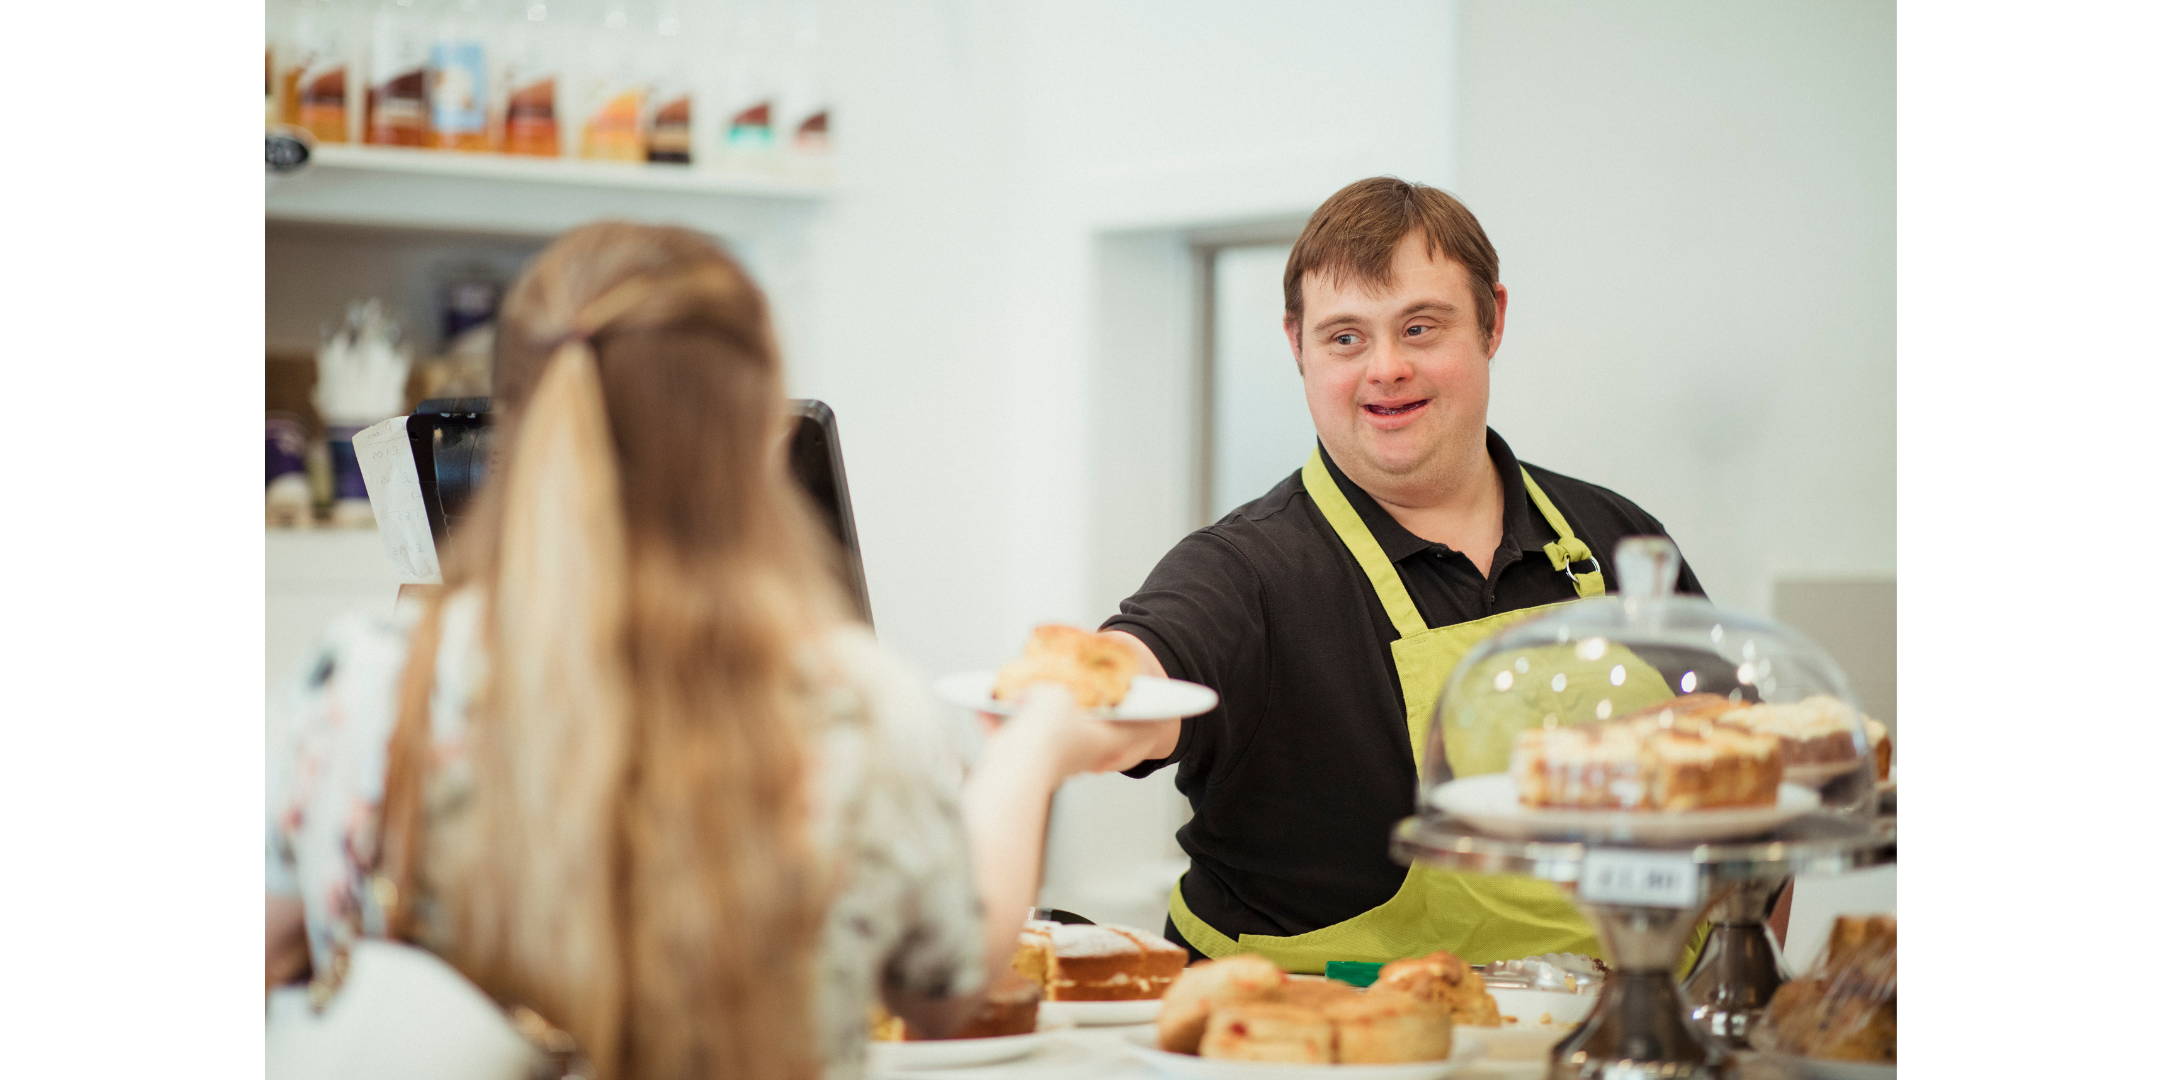 A young man with brown hair and wearing a yellow apron serving a scone to a lady across a counter